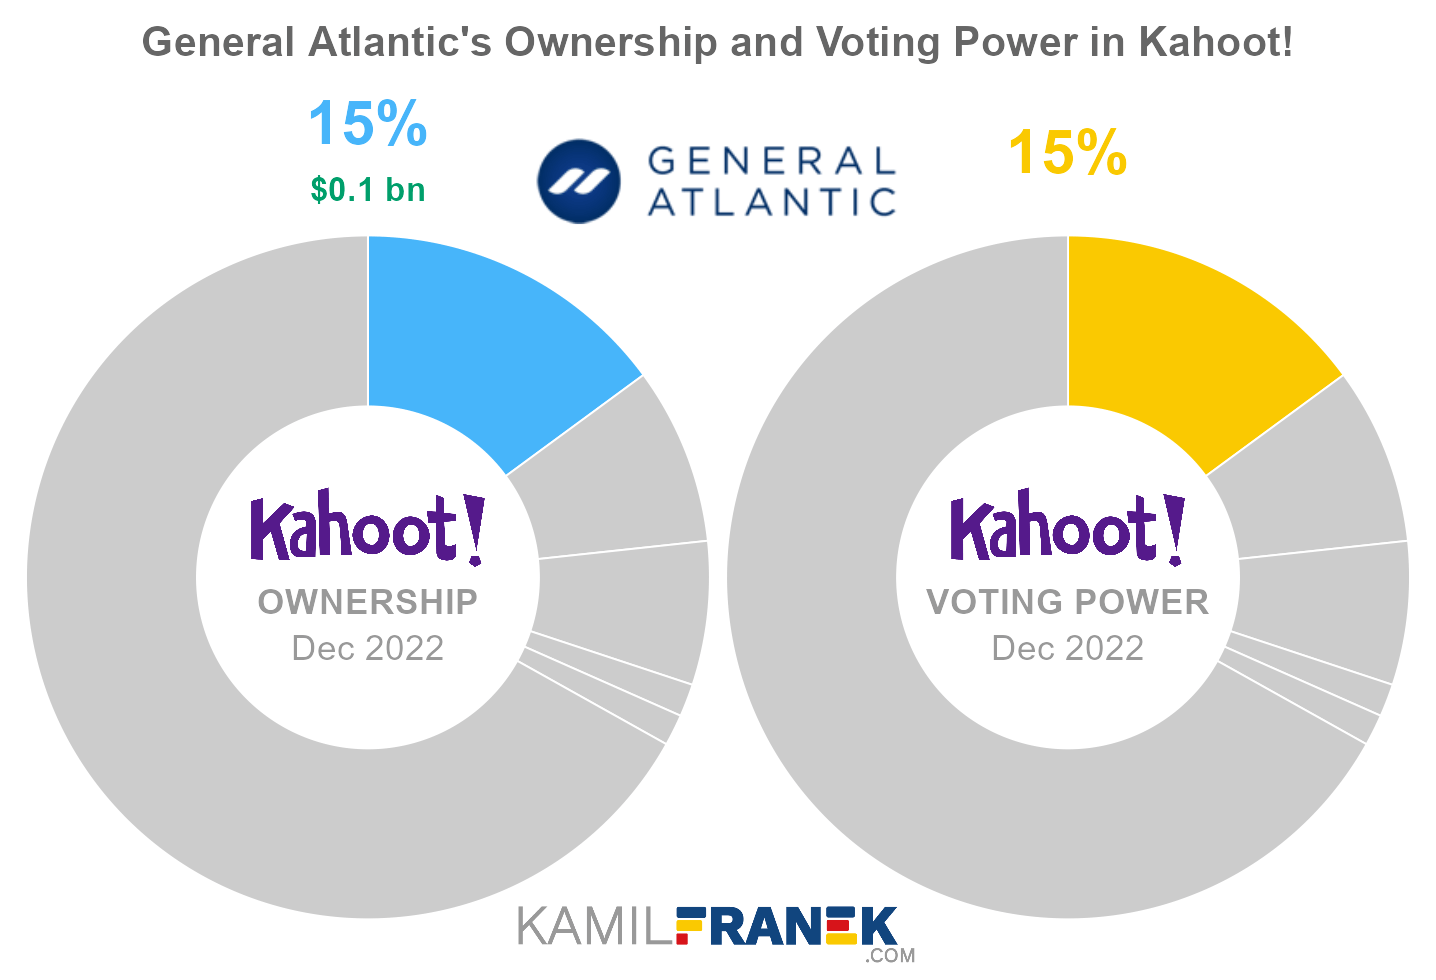 General Atlantic's share ownership and voting power in Kahoot! (chart)